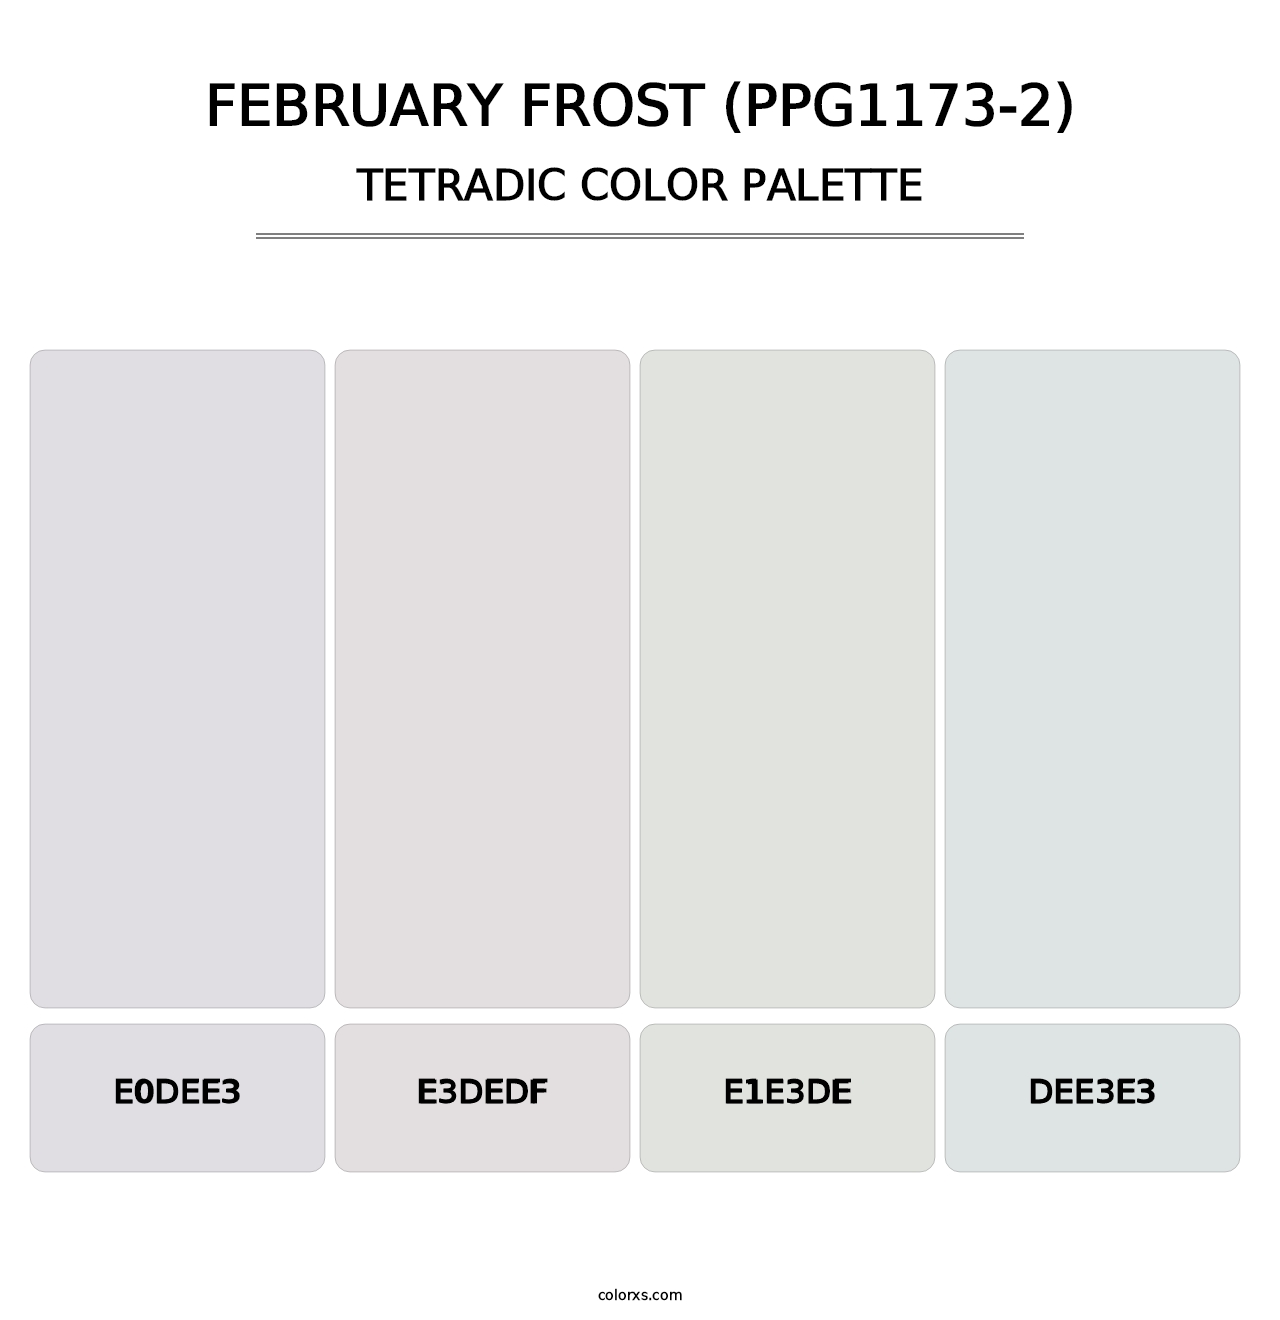 February Frost (PPG1173-2) - Tetradic Color Palette